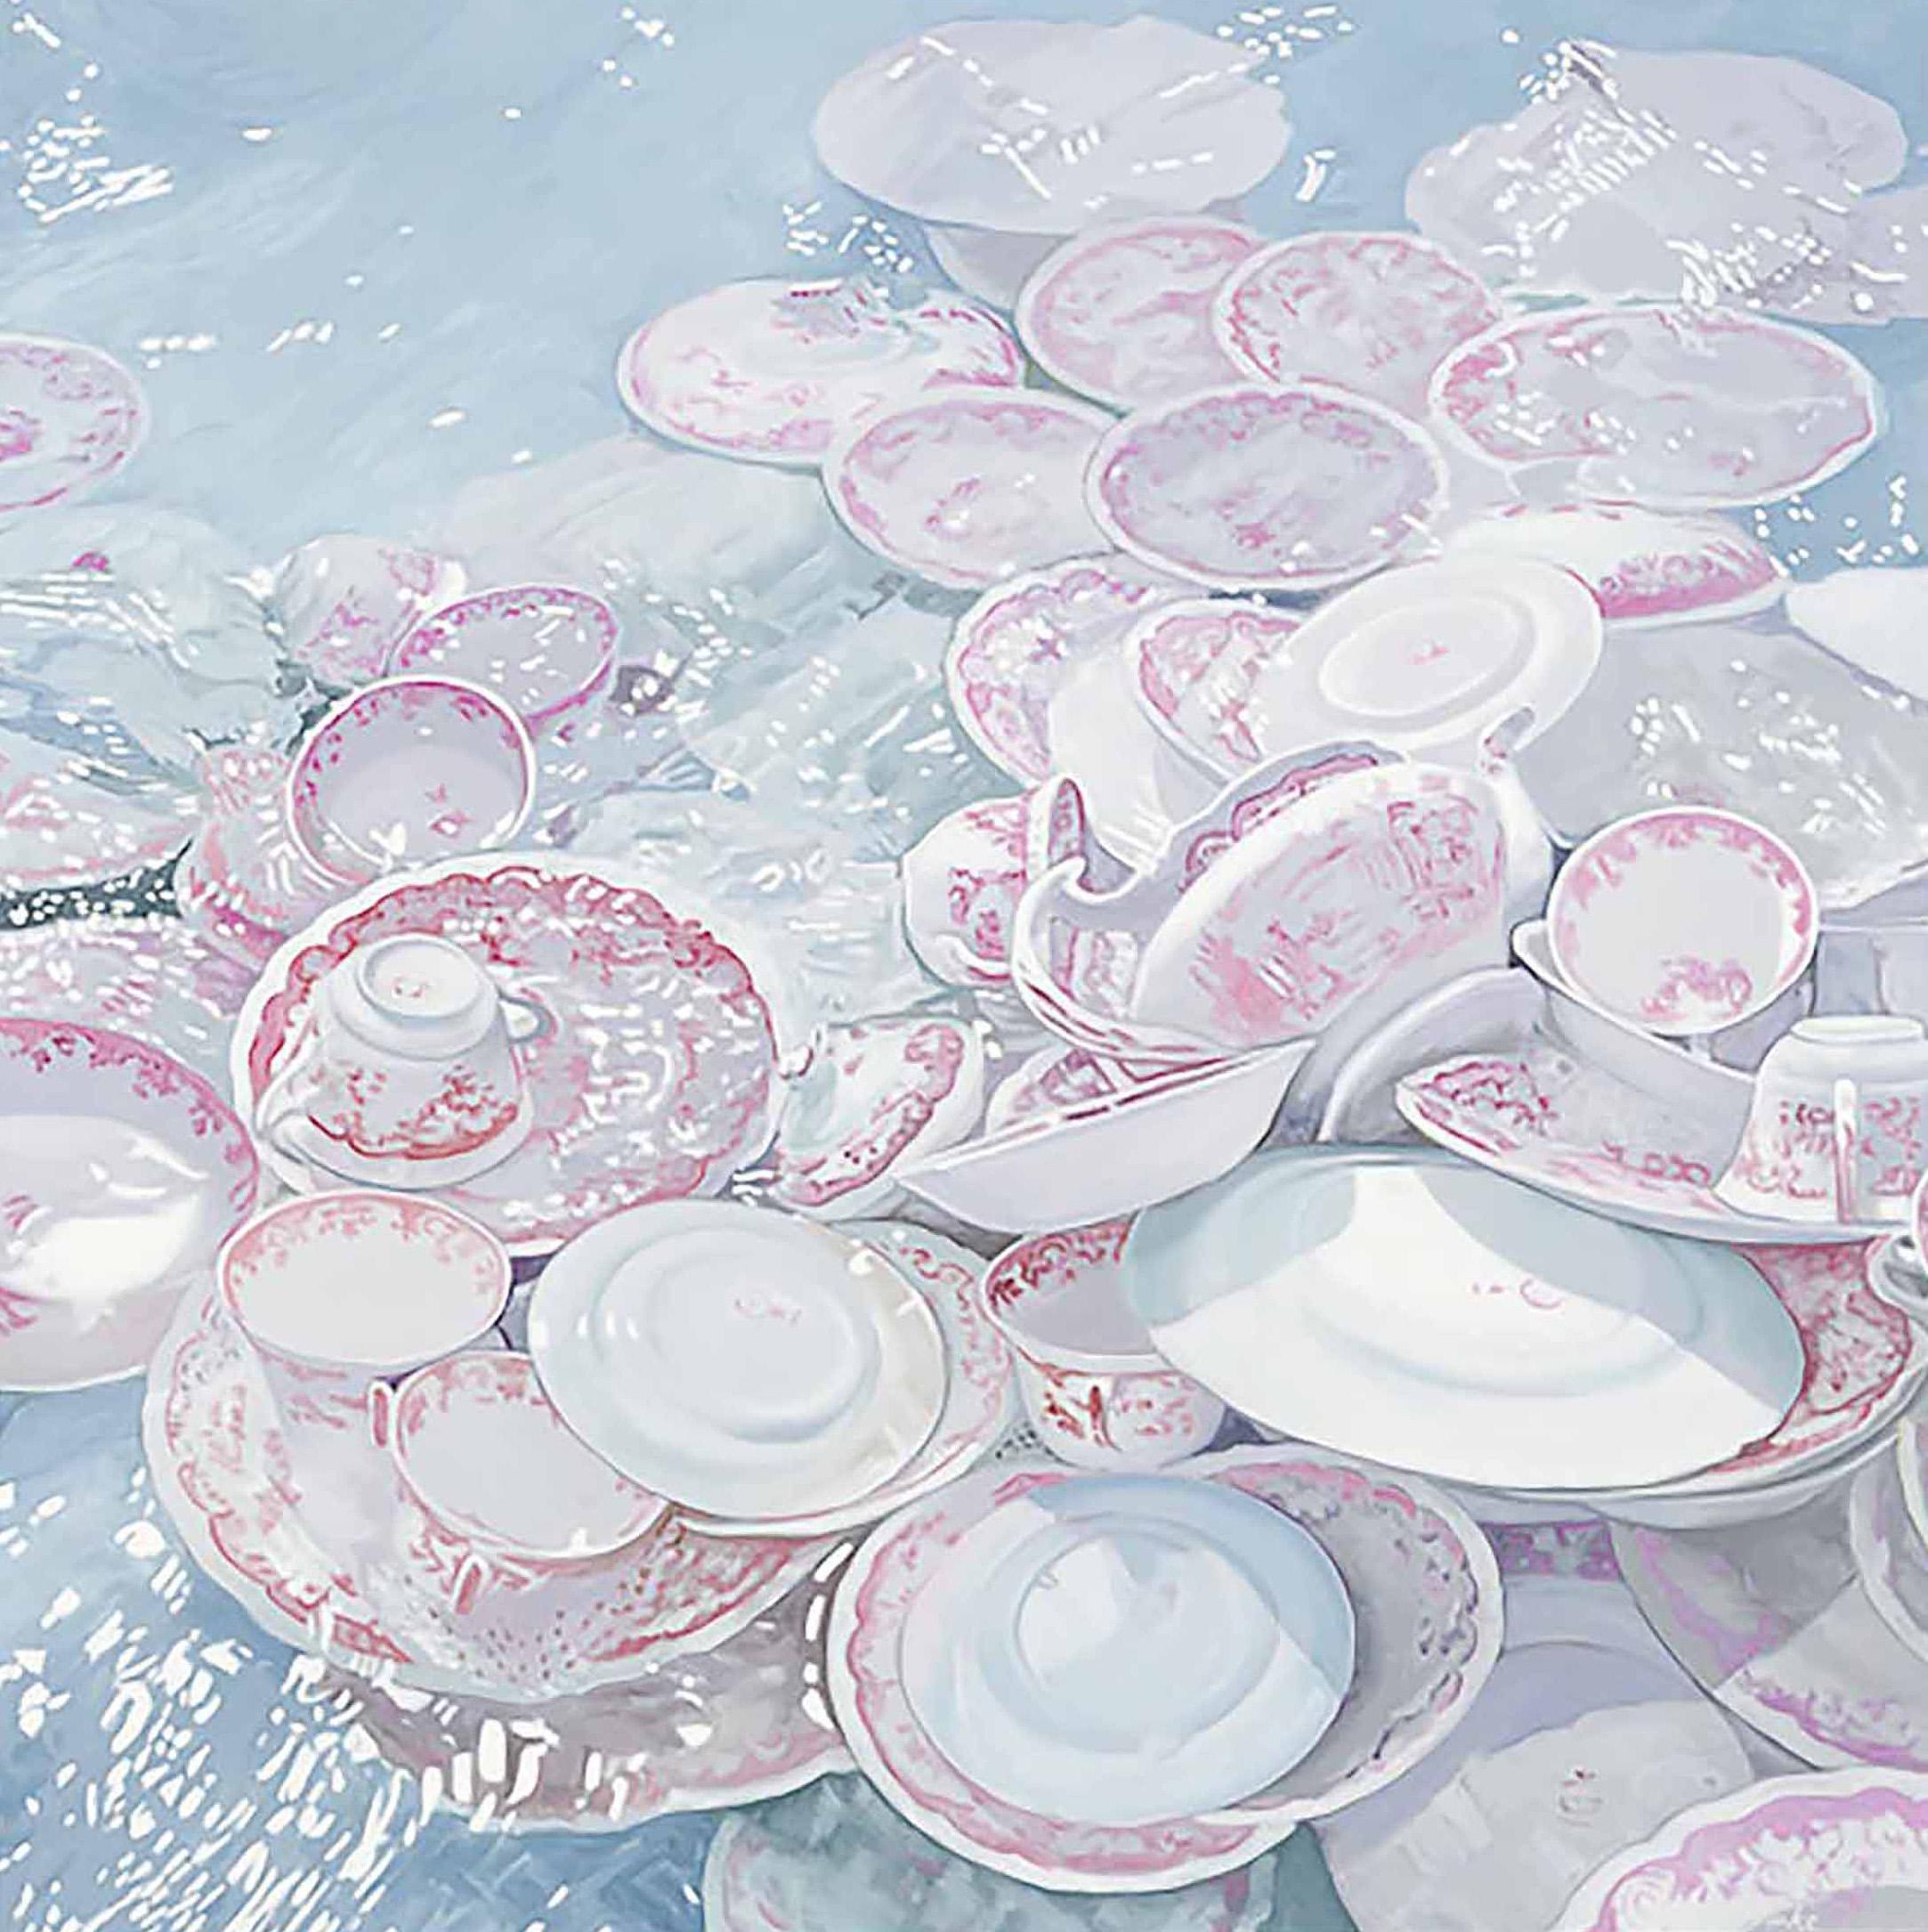 Leslie Parke, "Plates in the Ocean", 46x46 Still Life Oil Painting on Canvas